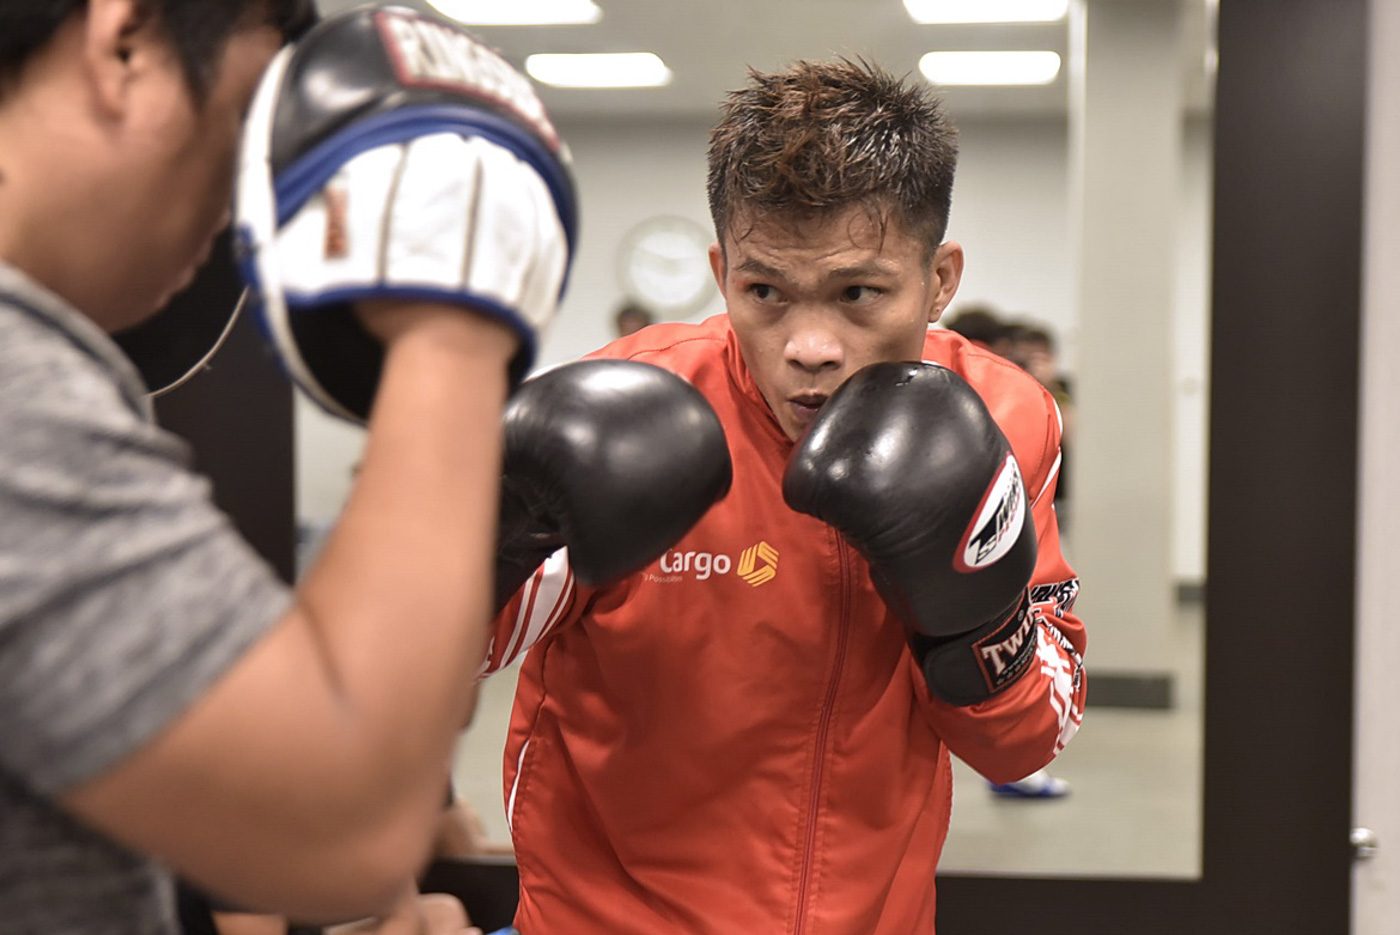 Ancajas starts training for Rungvisai title fight